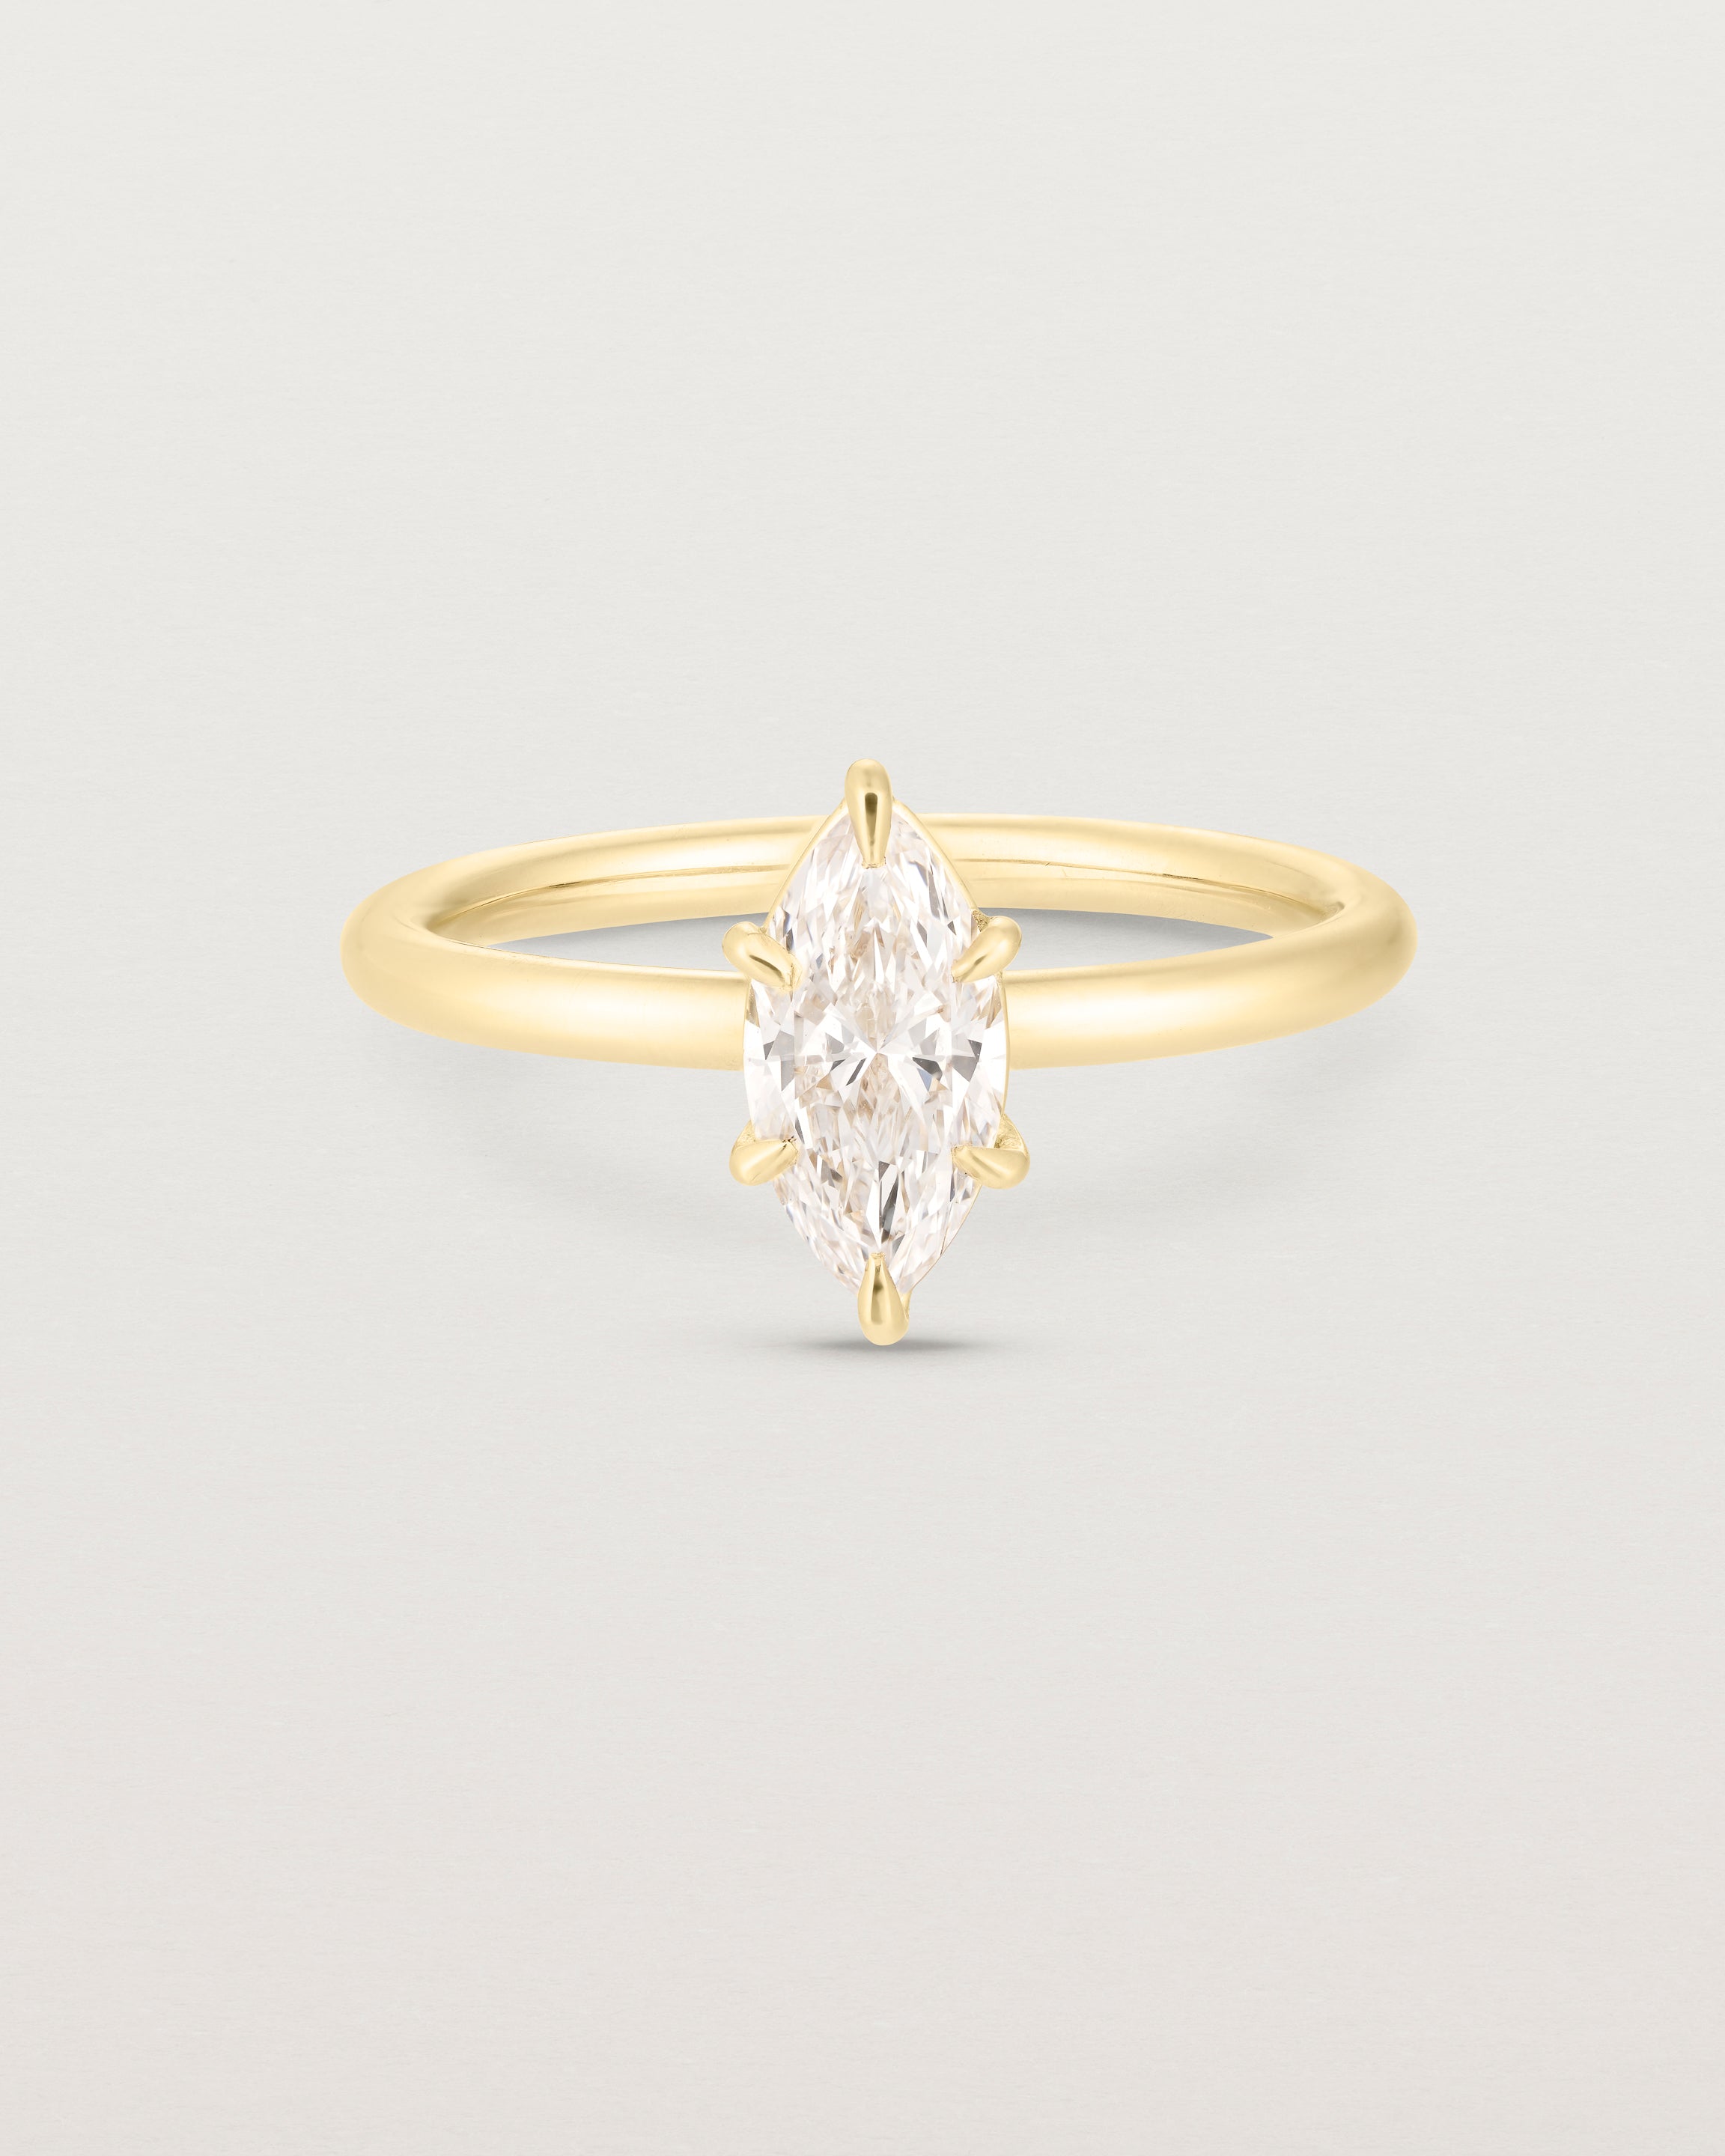 Front image of diamond marquise ring in yellow gold